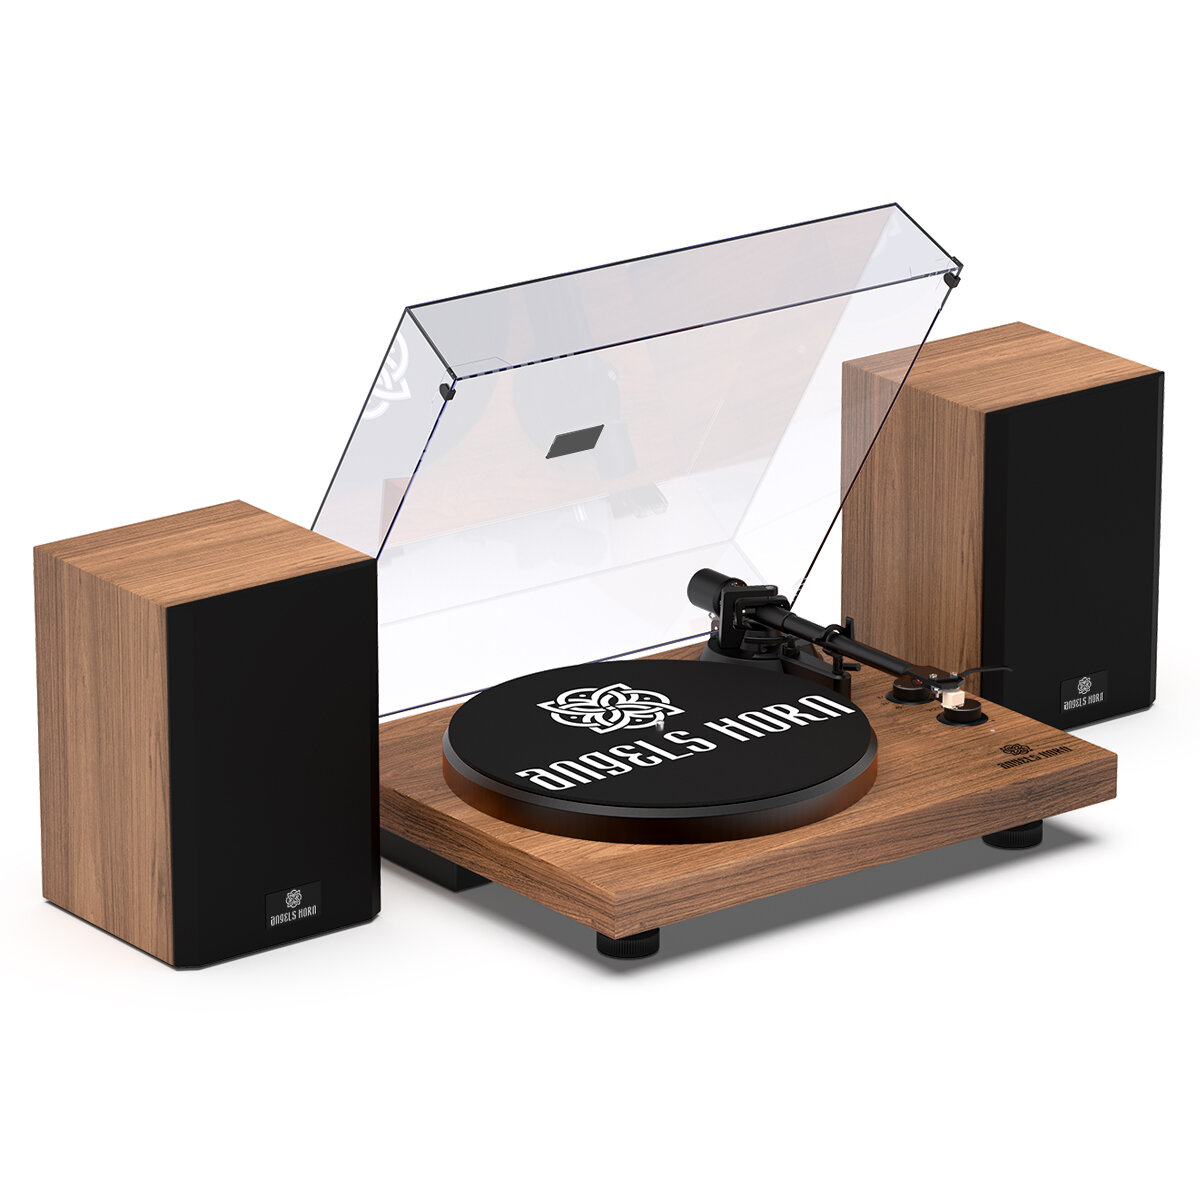 Angelshorn Stereo Decorative Record Player With Built-in Phono And Belt Drive Turntable, 2-speed Vinyl Record With 2 Pcs Bluetooth Bookshelf Speakers, Walnut & Reviews | Wayfair